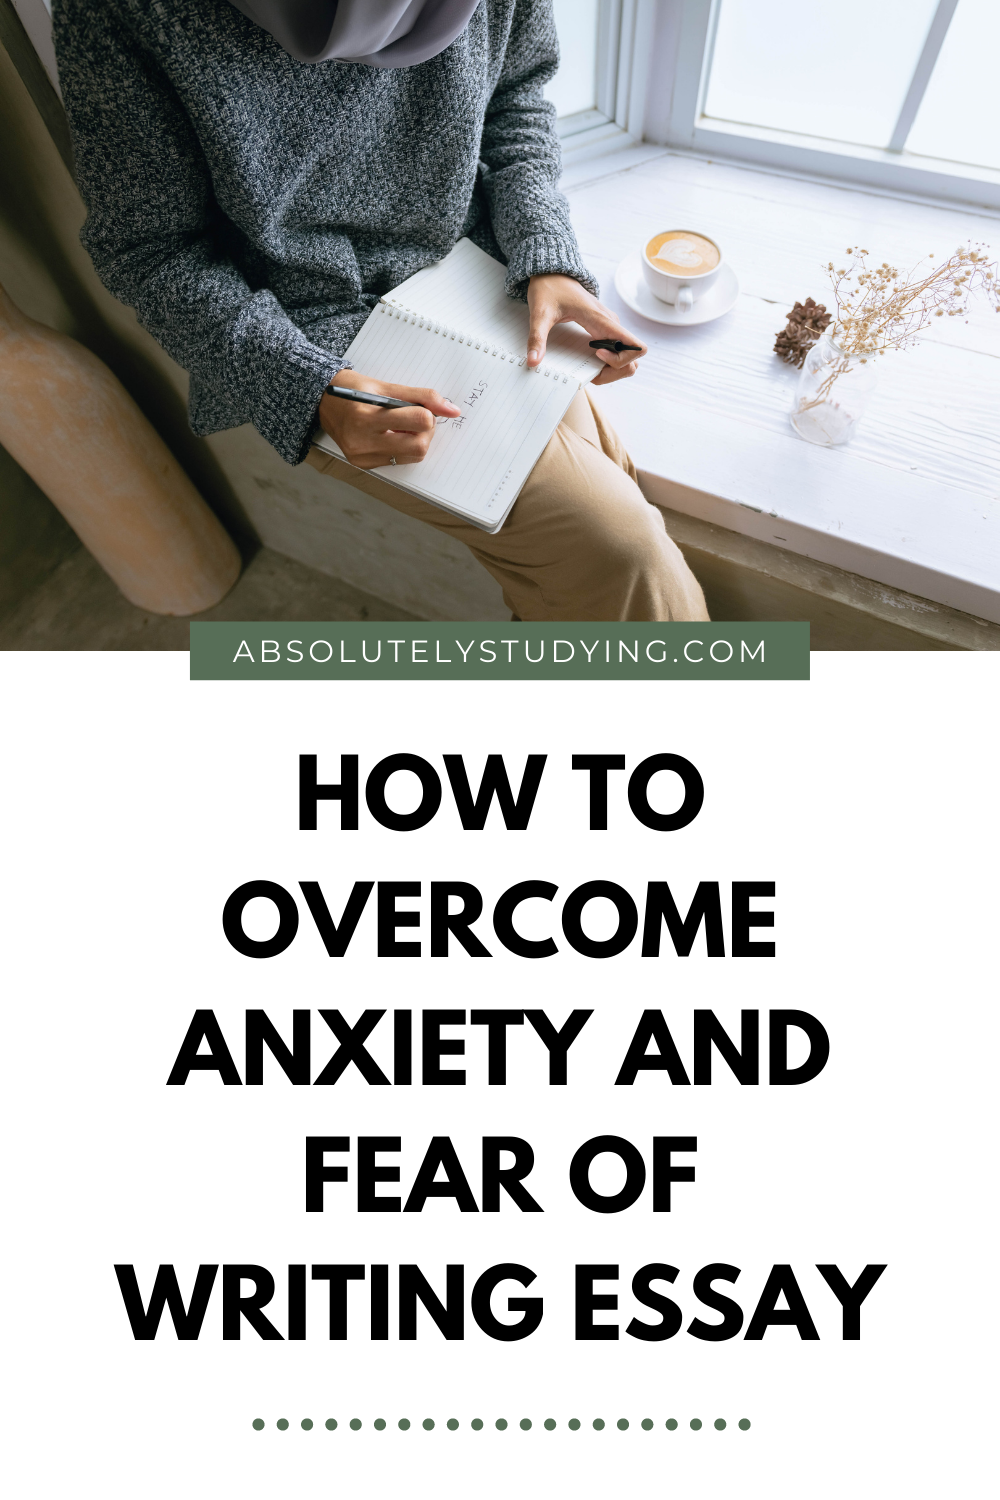 How to Overcome the Anxiety and Fear of Essay Writing so you can Get Started